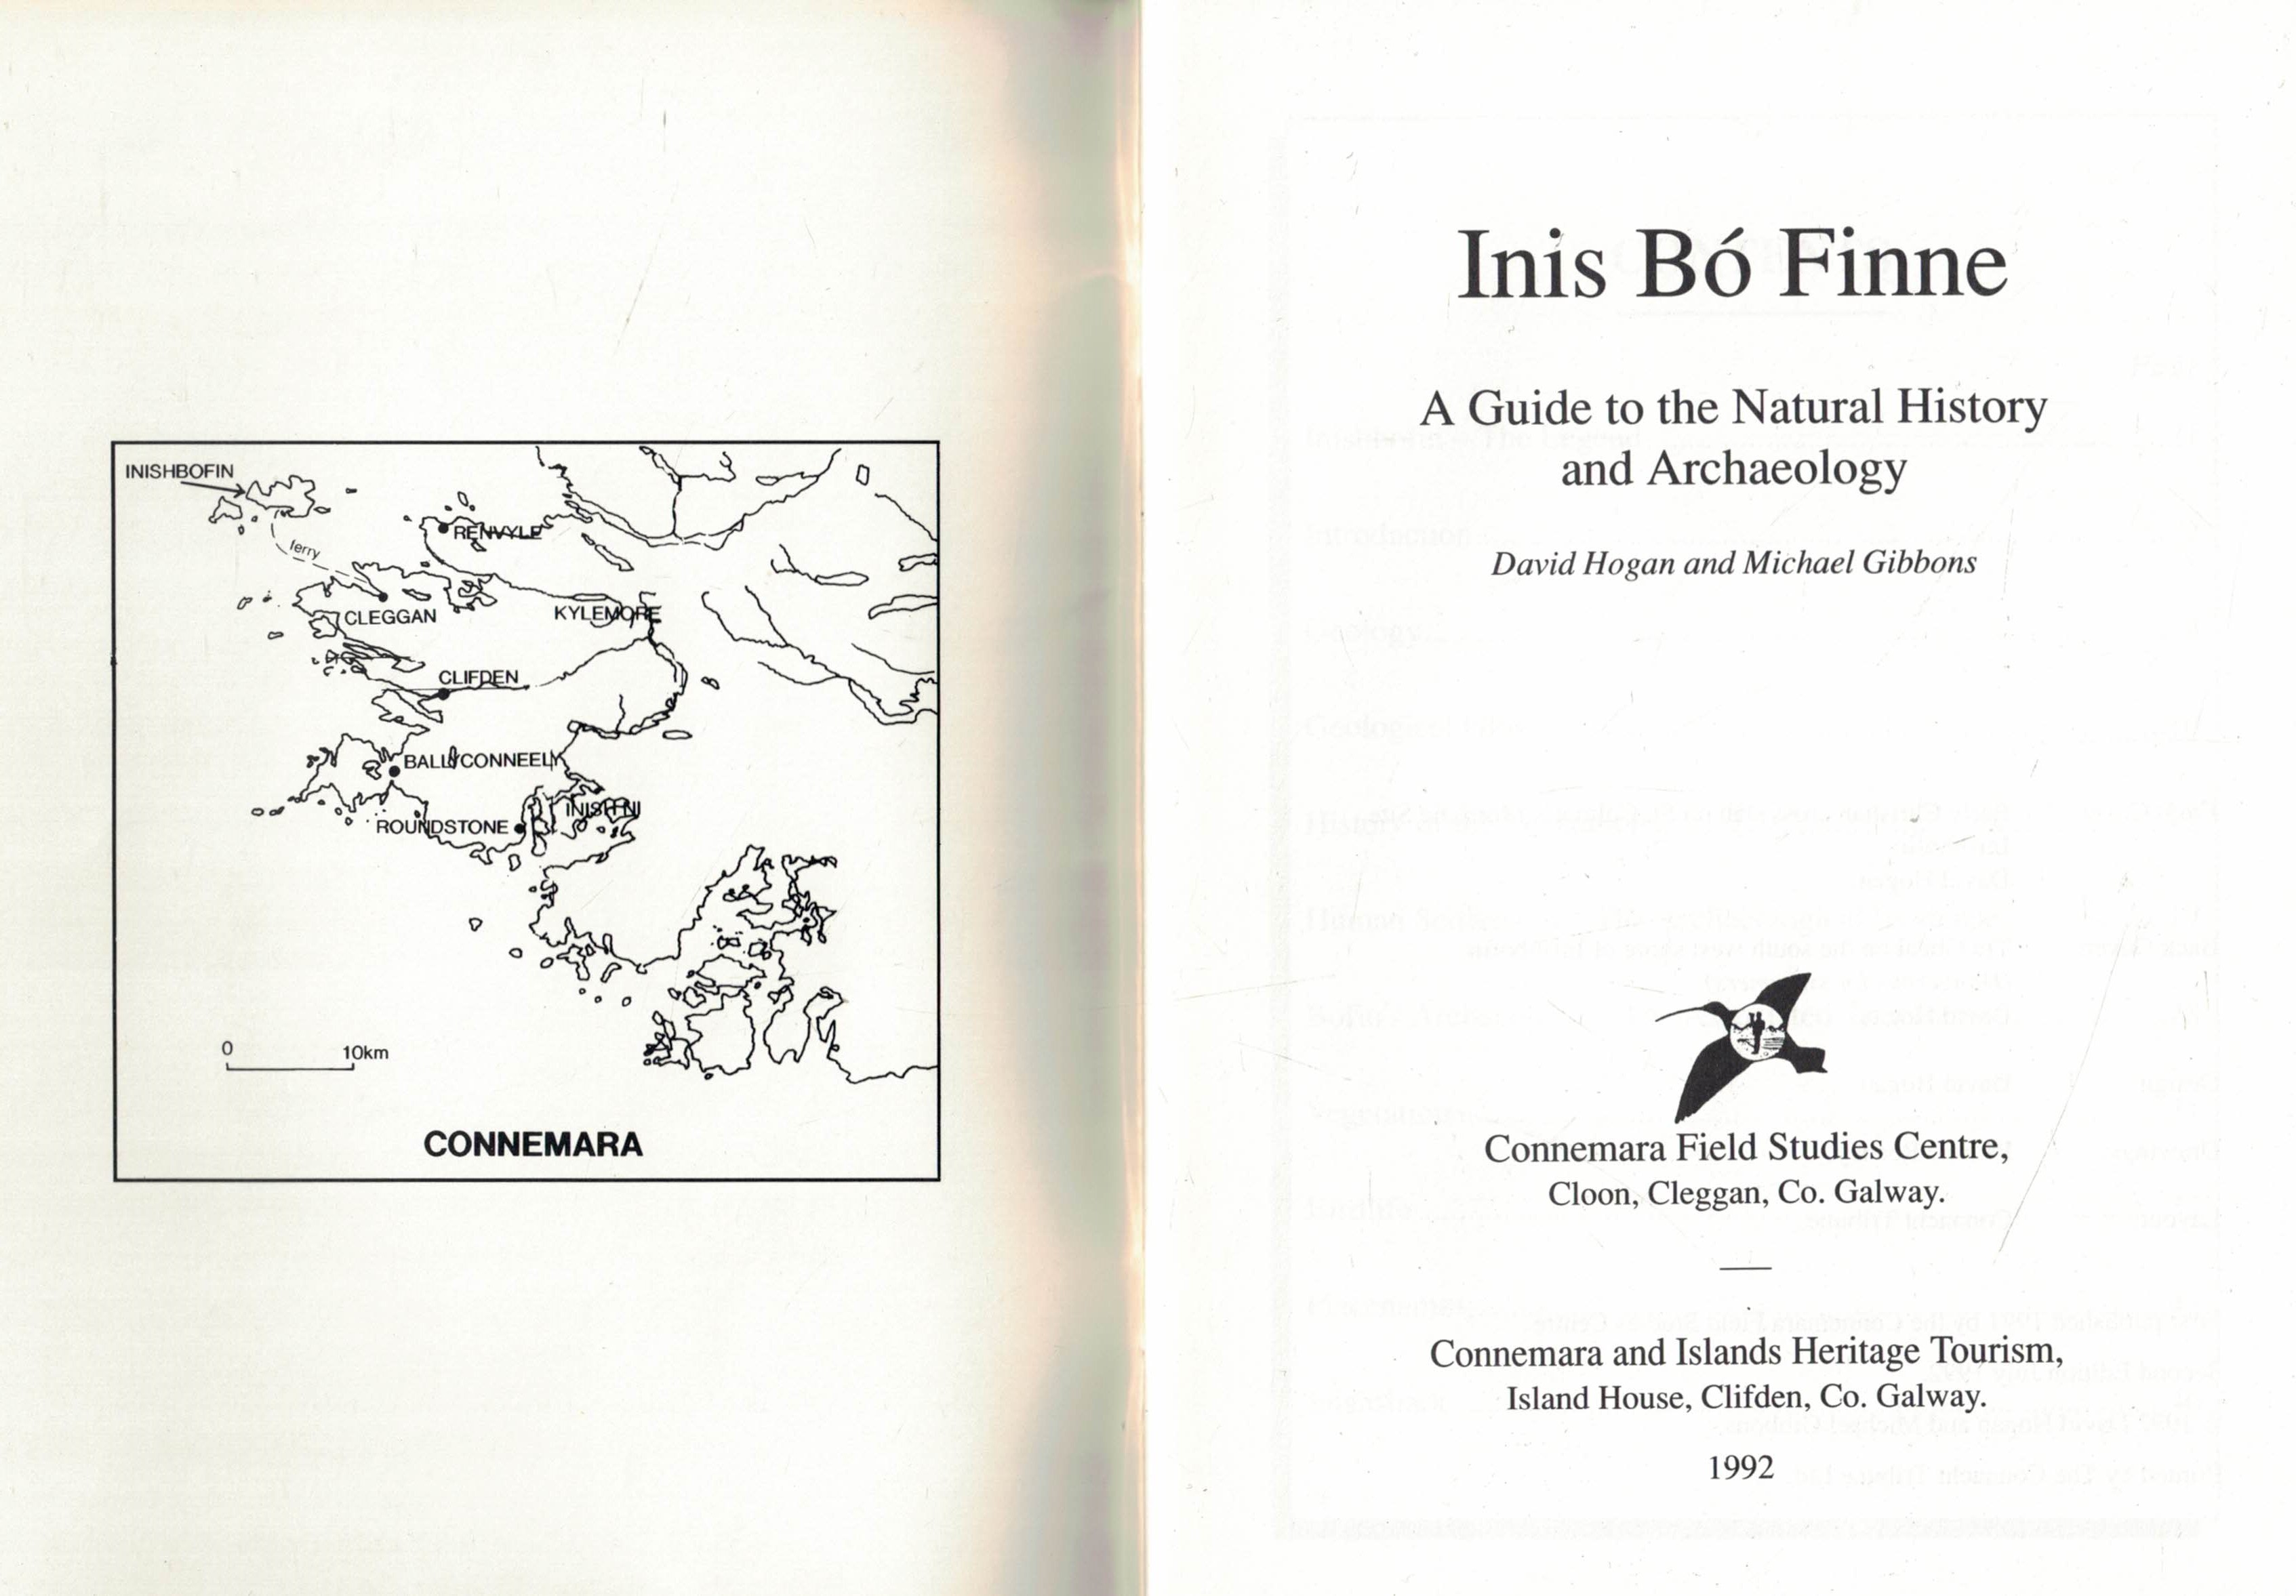 Inis B Finne. A Guide to the Natural History and Archaeology.